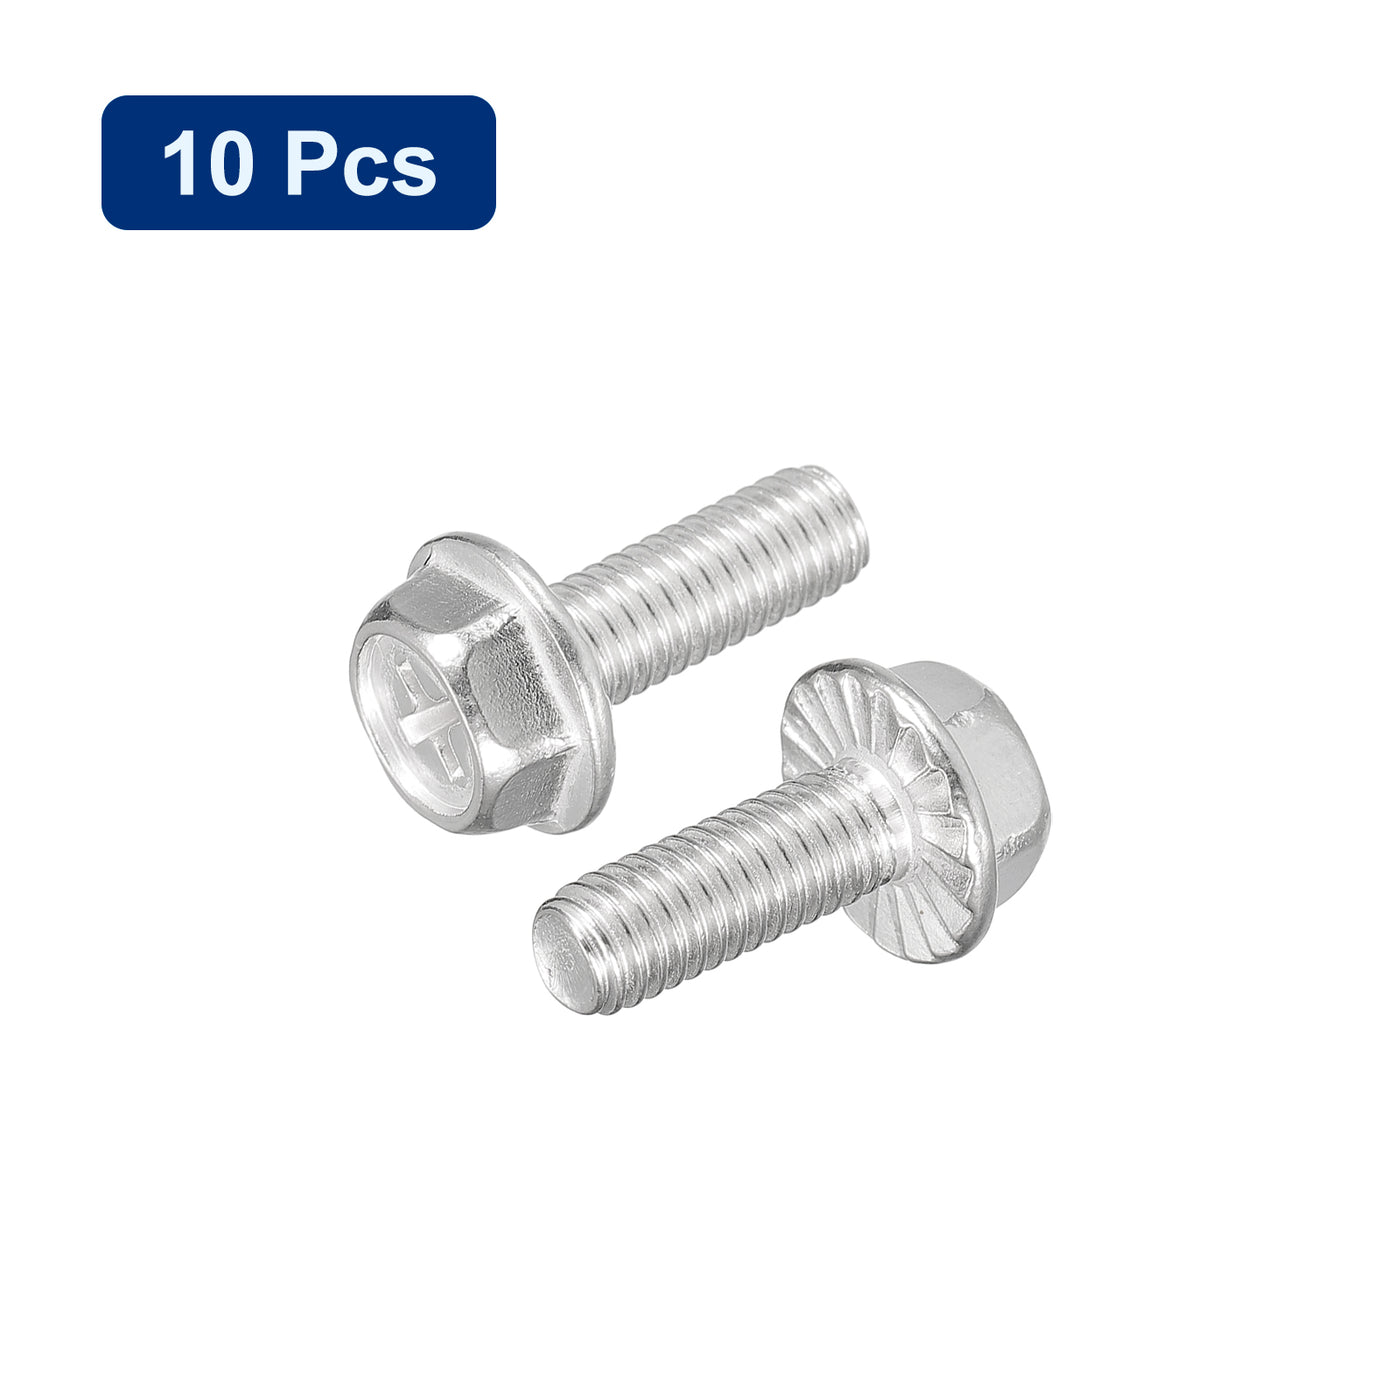 uxcell Uxcell M6x16mm Phillips Hex Head Flange Bolts, 10pcs 304 Stainless Steel Screws